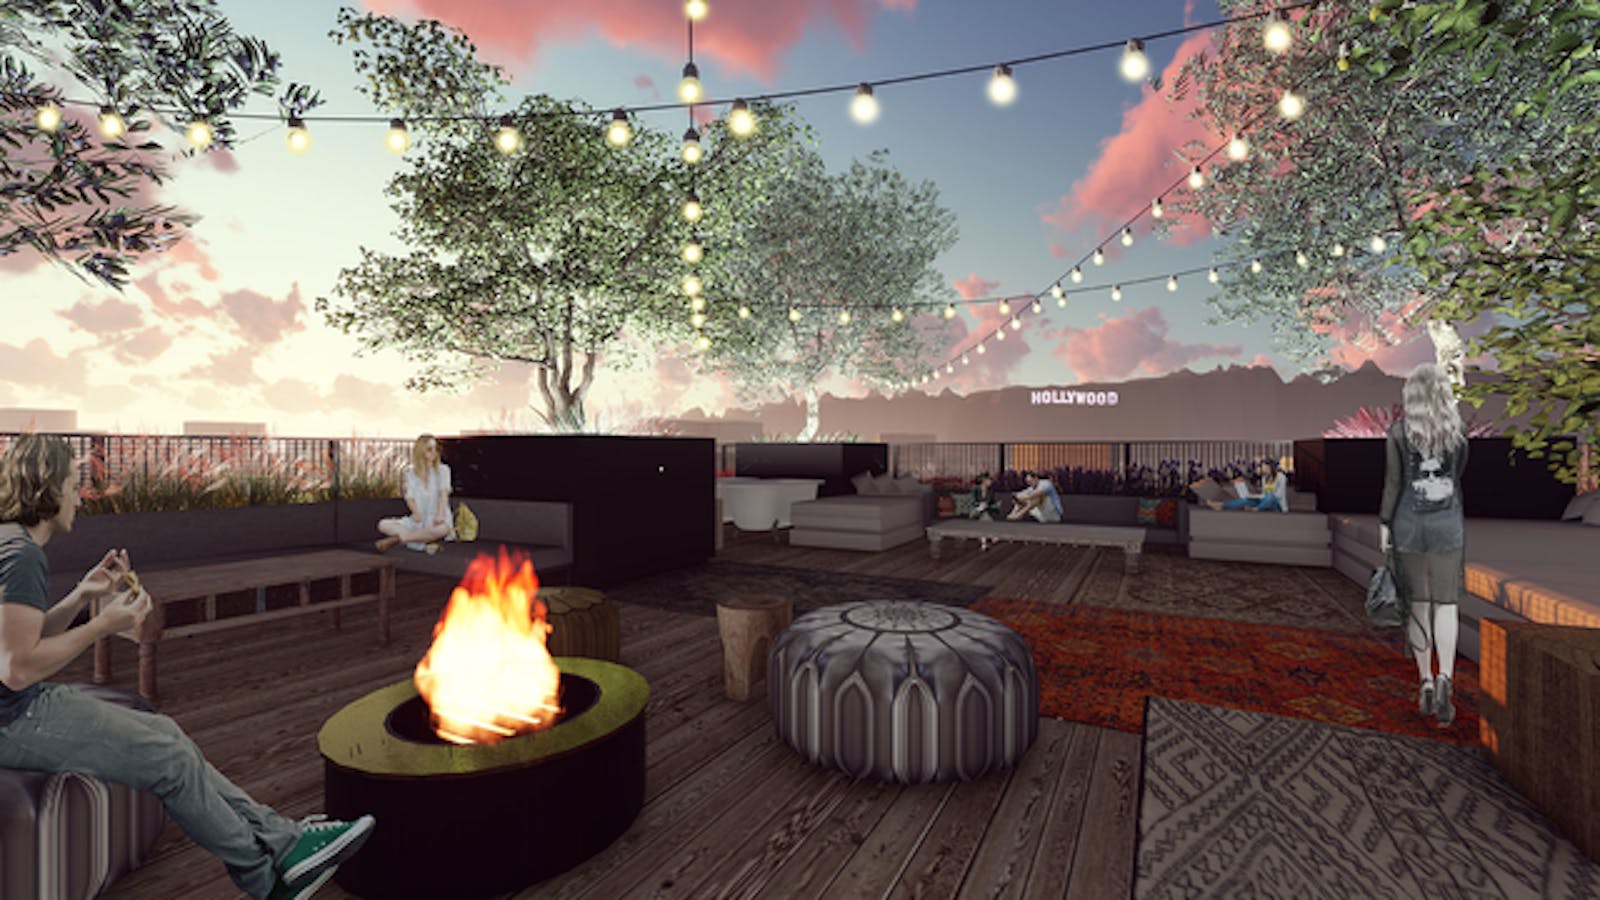 An artists' rendering of the roof deck at Treehouse's first Los Angeles apartment building. Image by Treehouse.